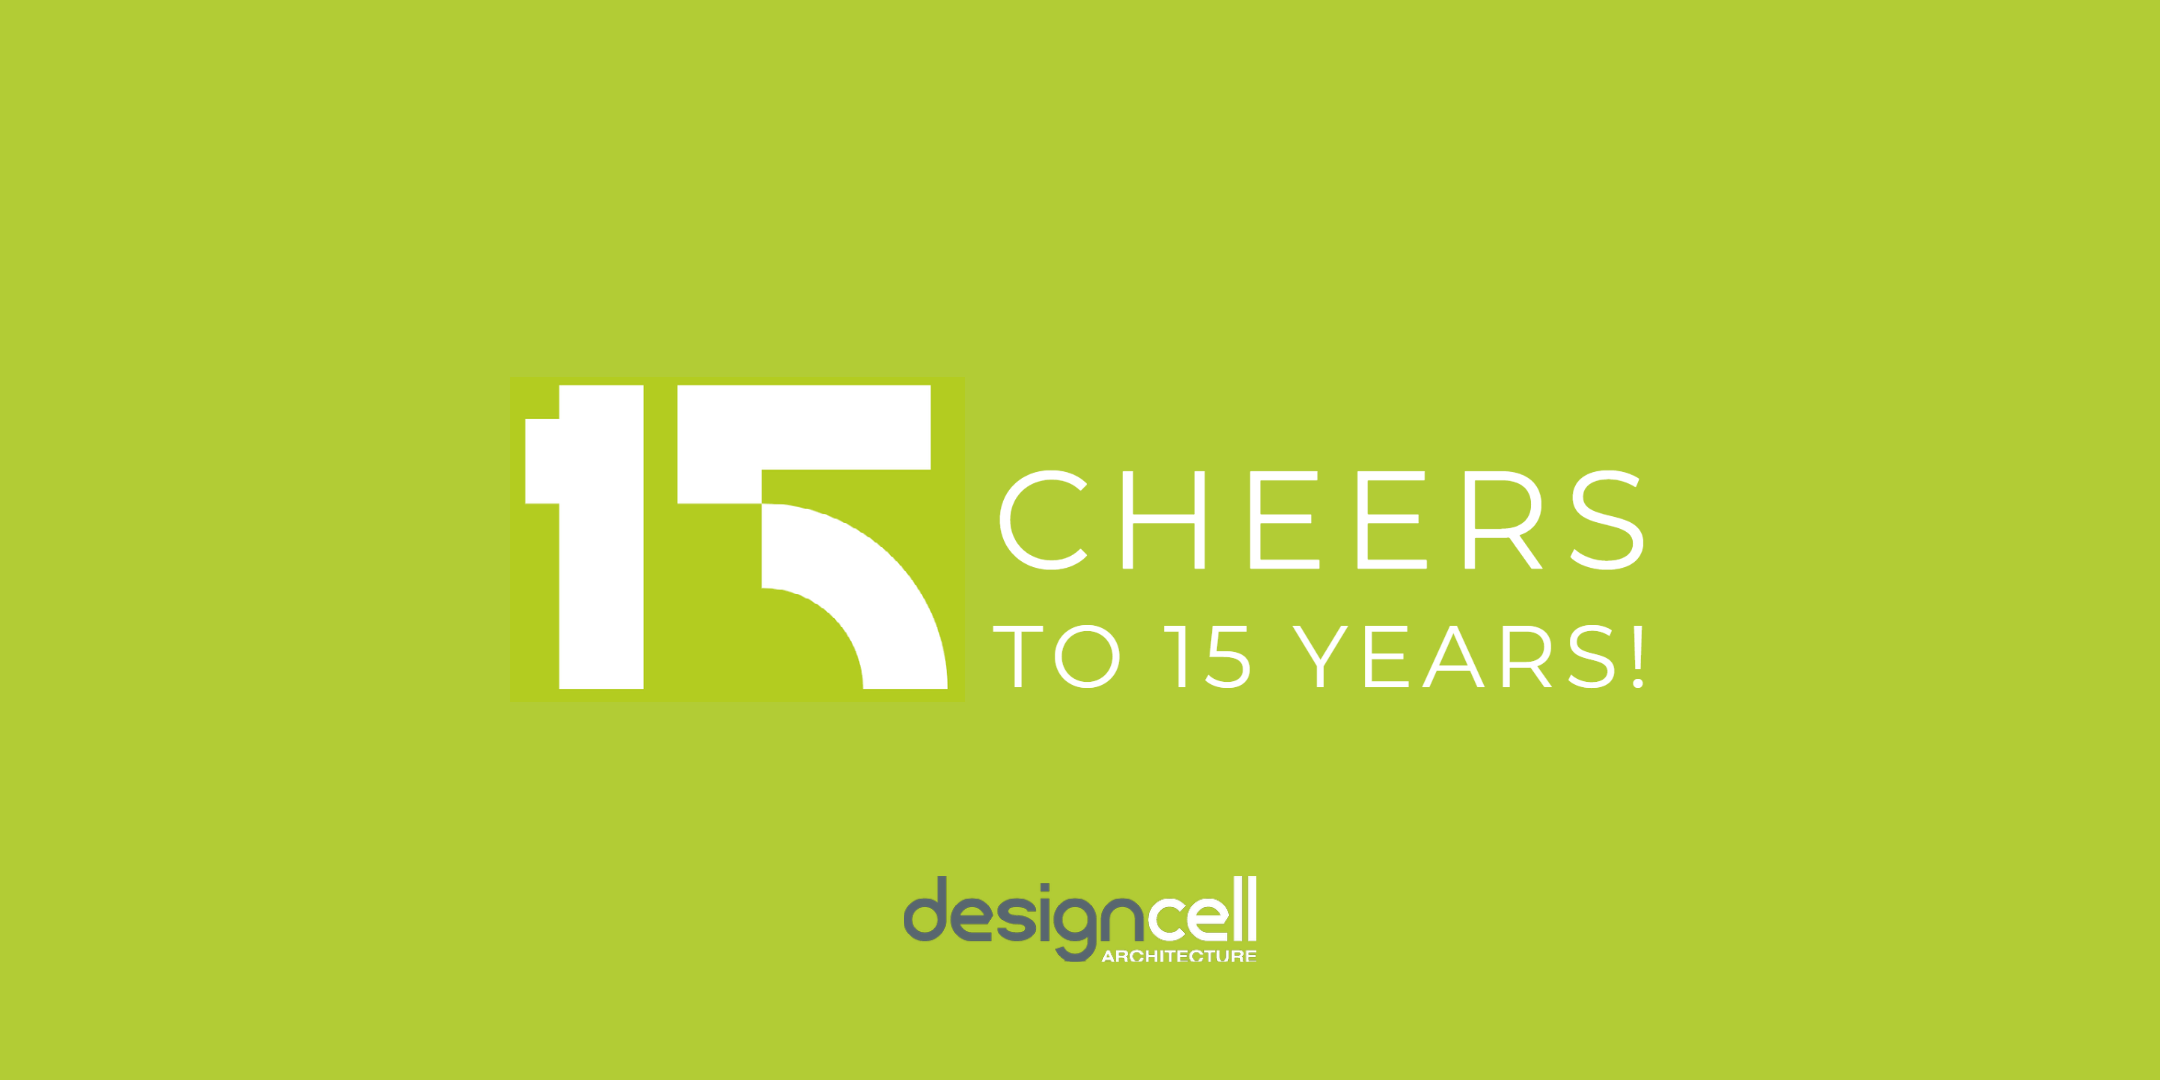 DesignCell is Celebrating 15 Years